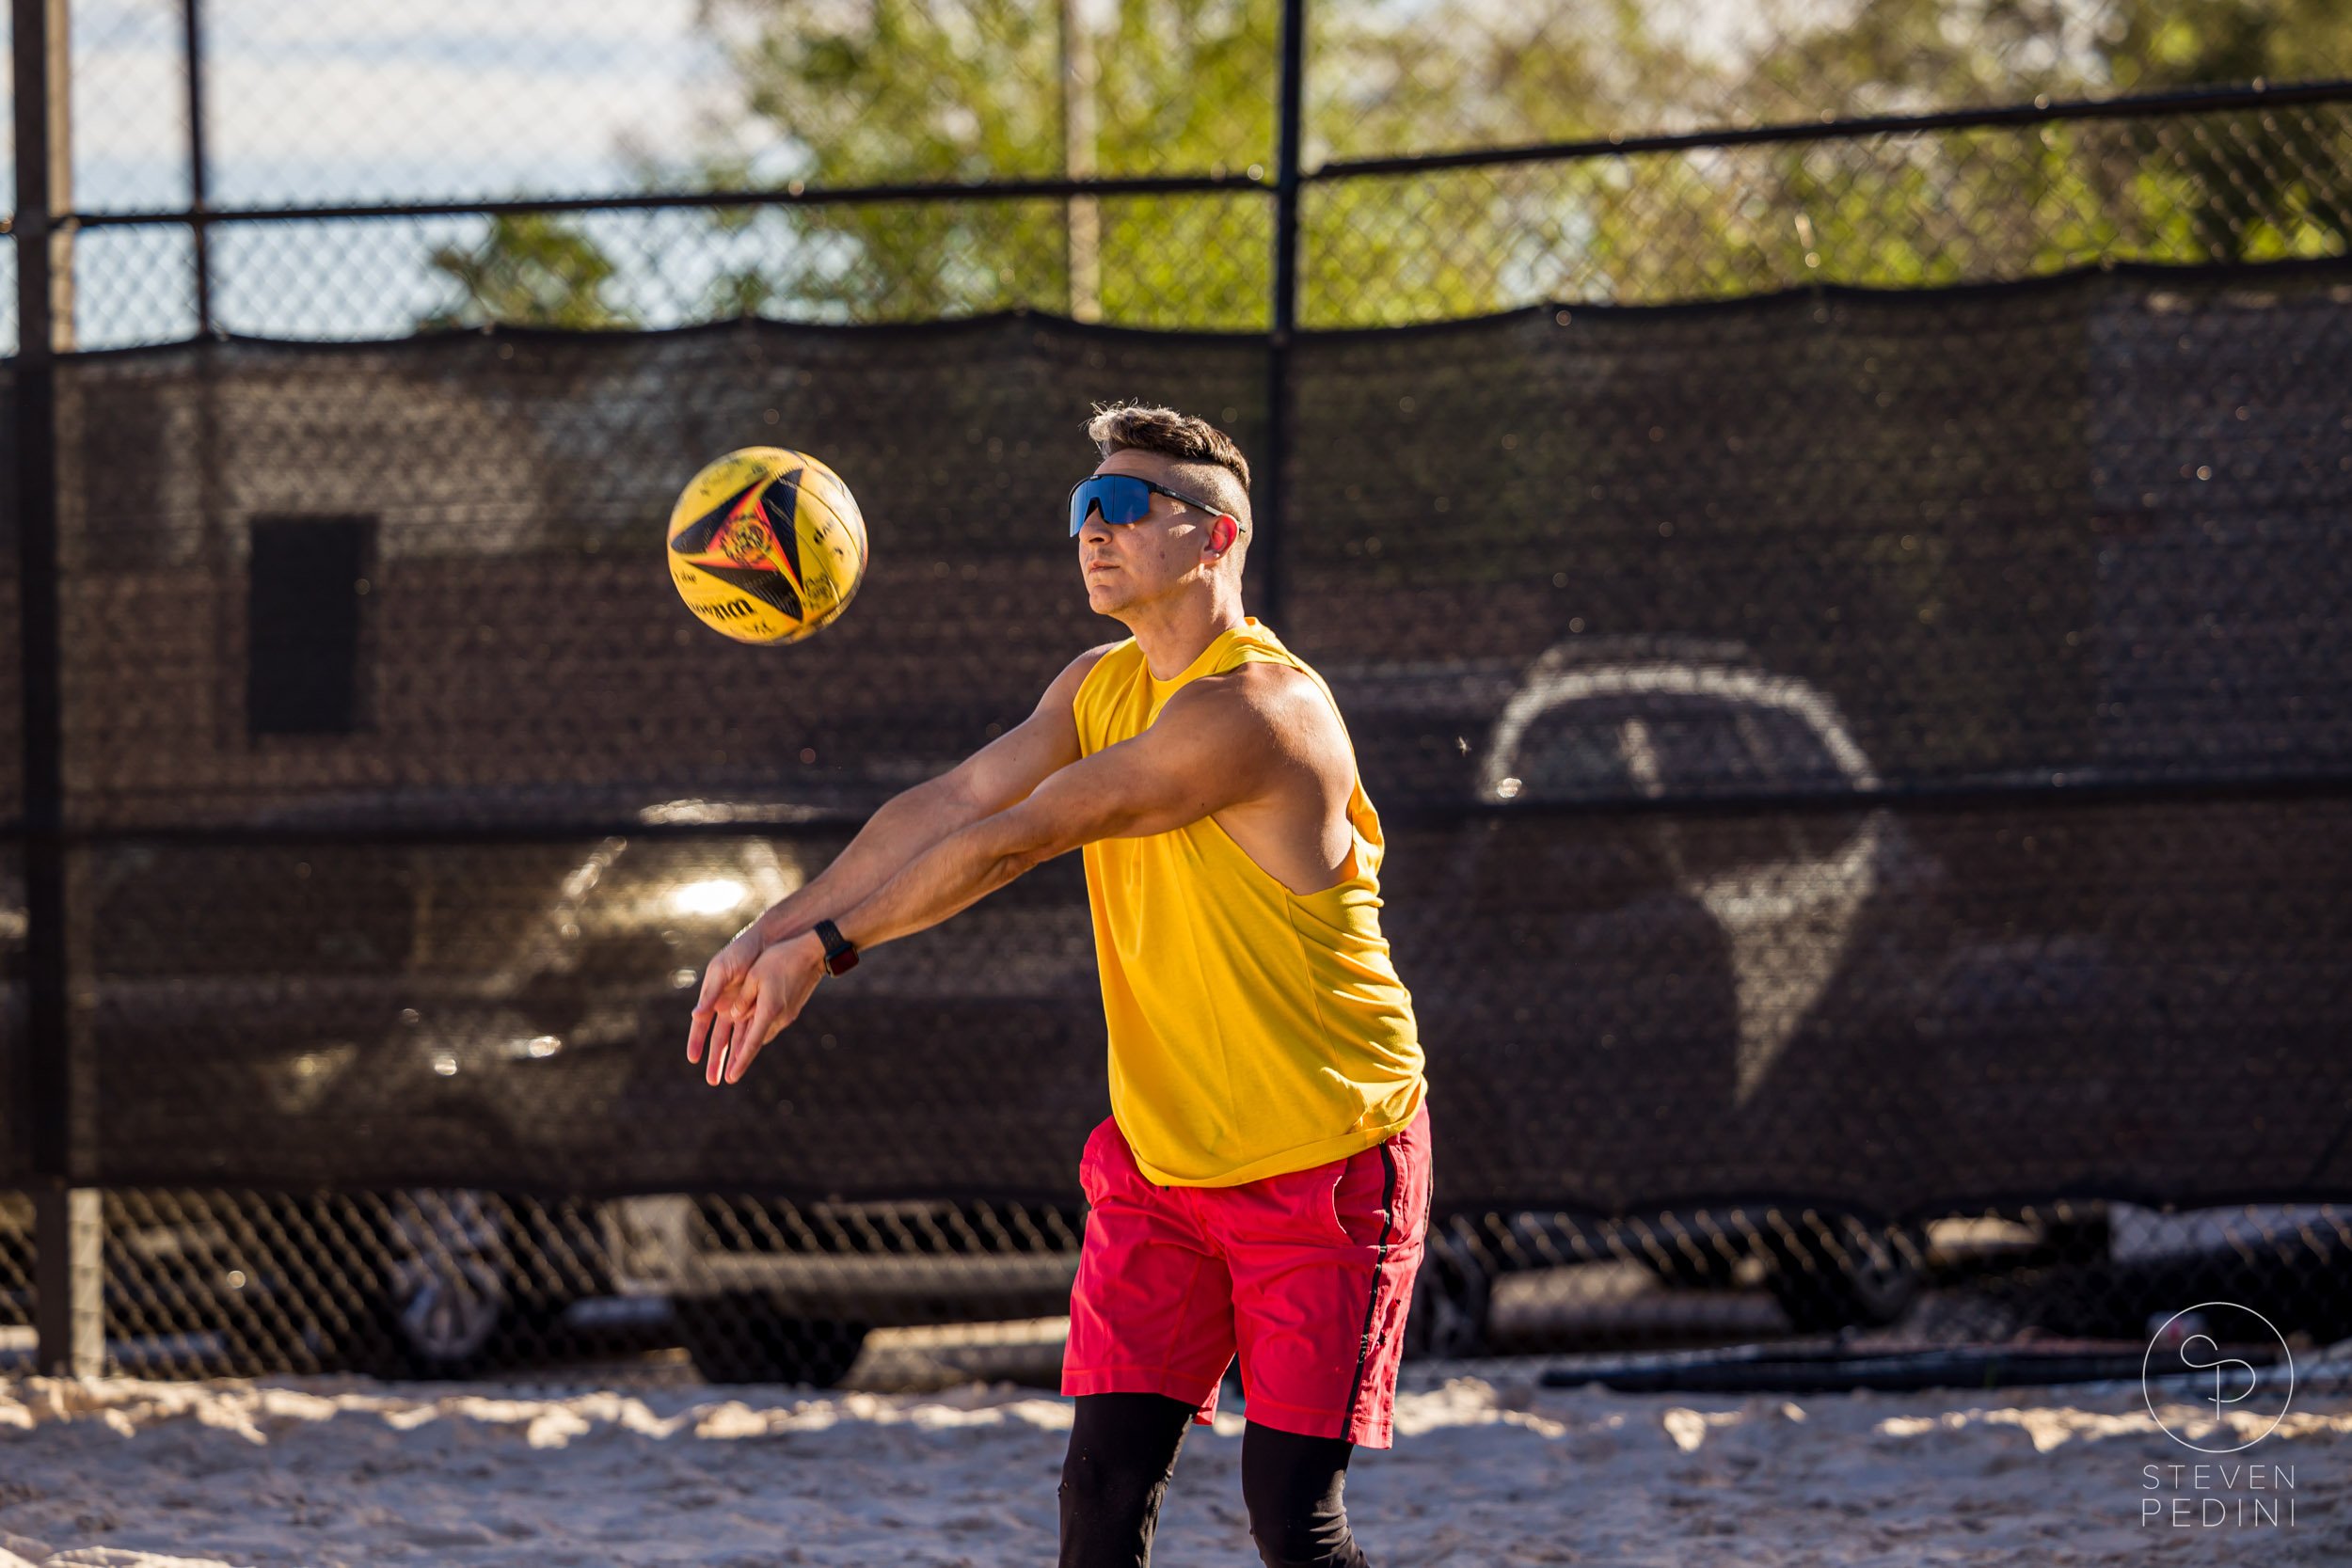 Steven Pedini Photography - Bumpy Pickle - Sand Volleyball - Houston TX - World Cup of Volleyball - 00003.jpg